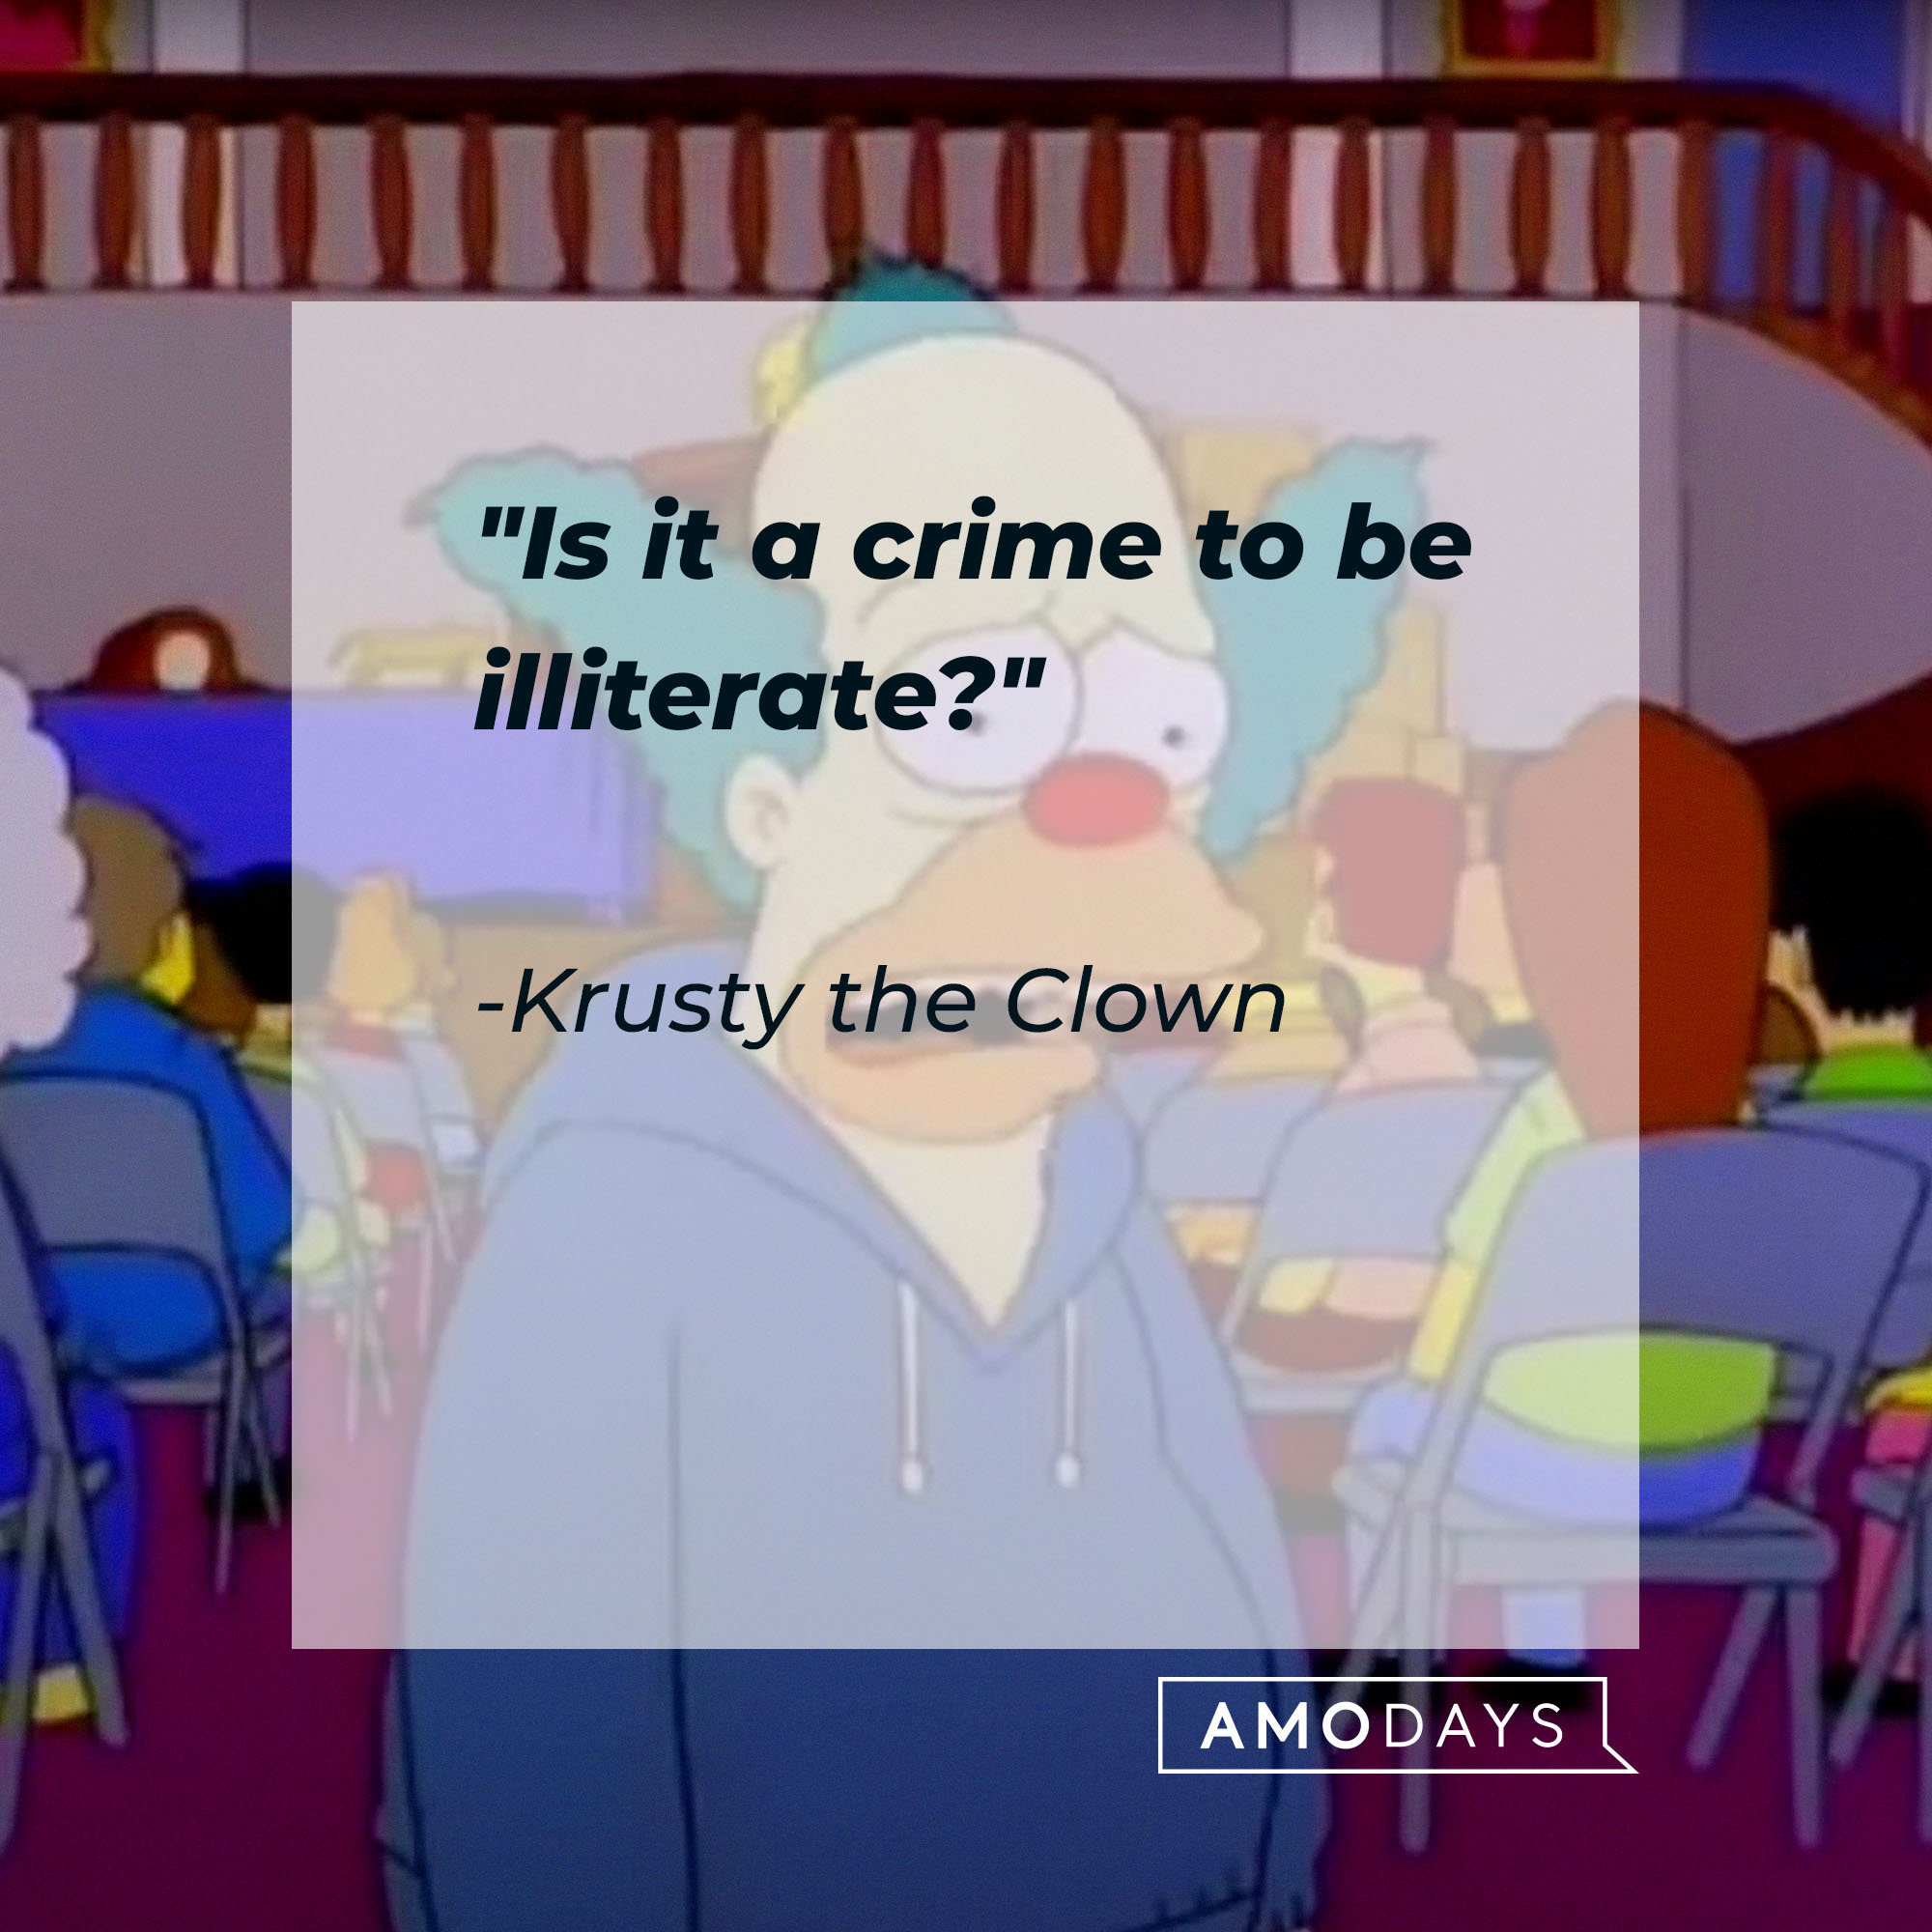 Krusty the Clown's quote: "Is it a crime to be illiterate?" | Source: Facebook.com/TheSimpsons